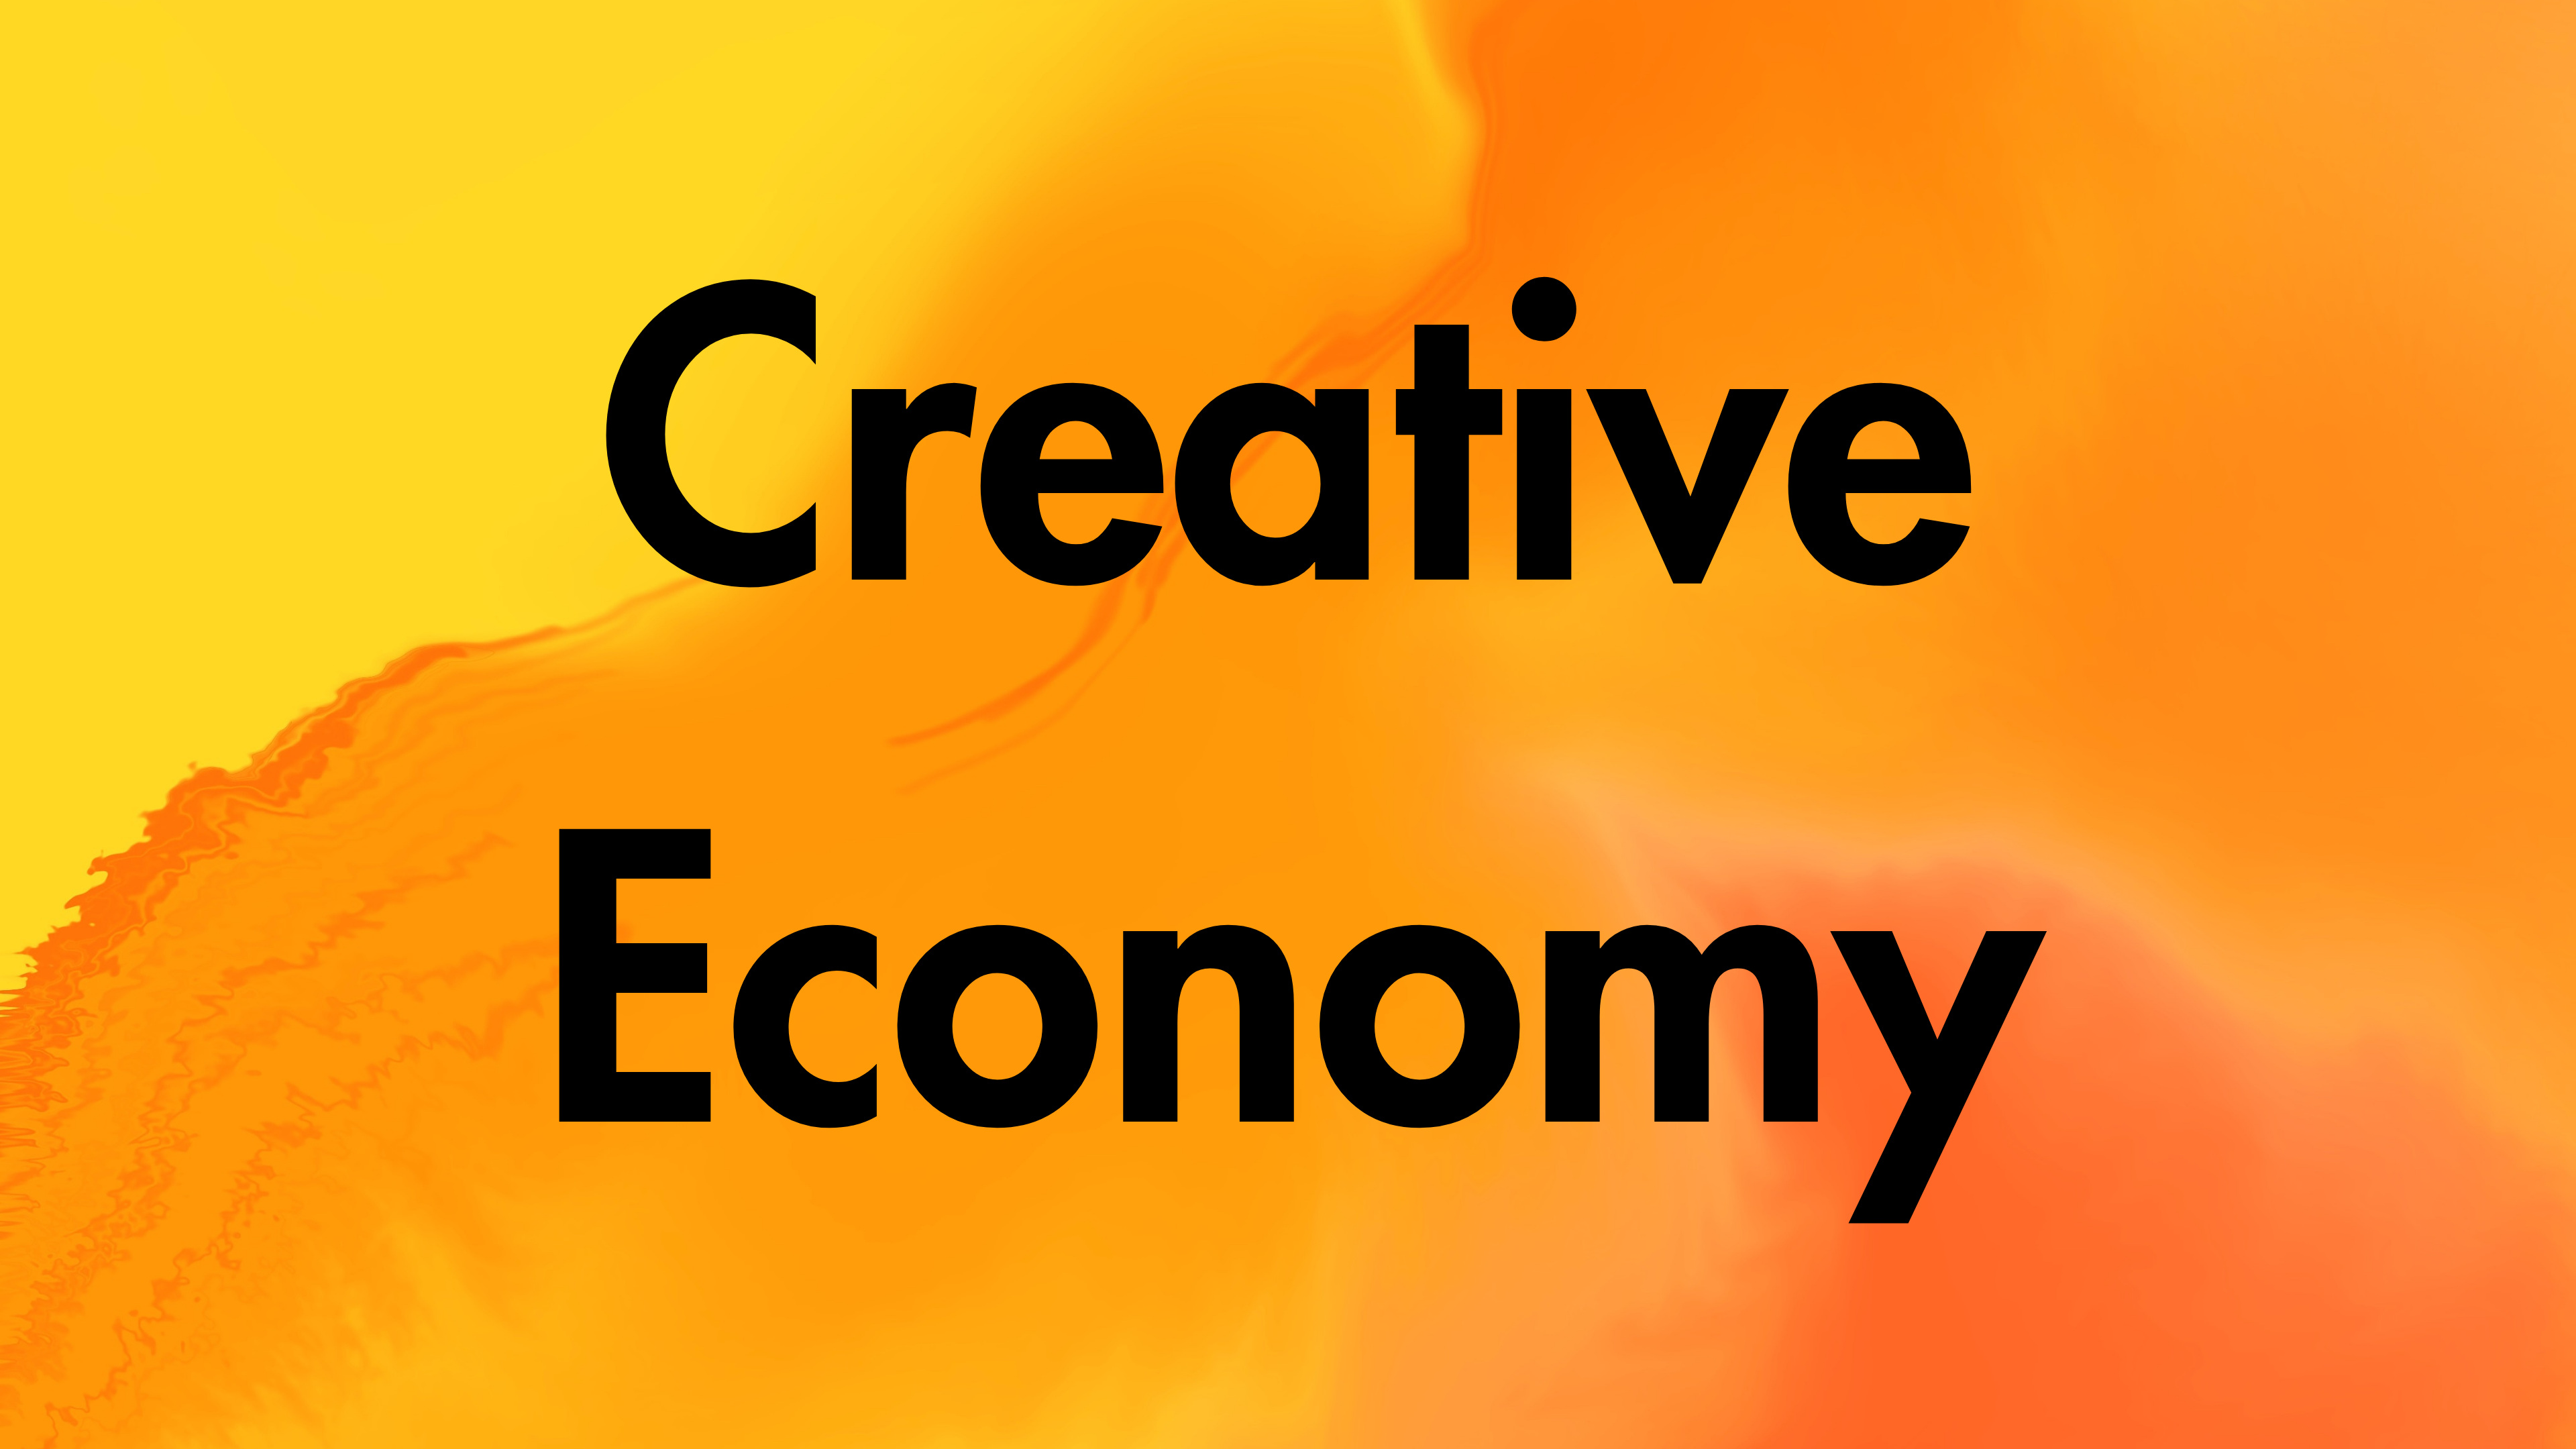 Creative Economy – What and Why?